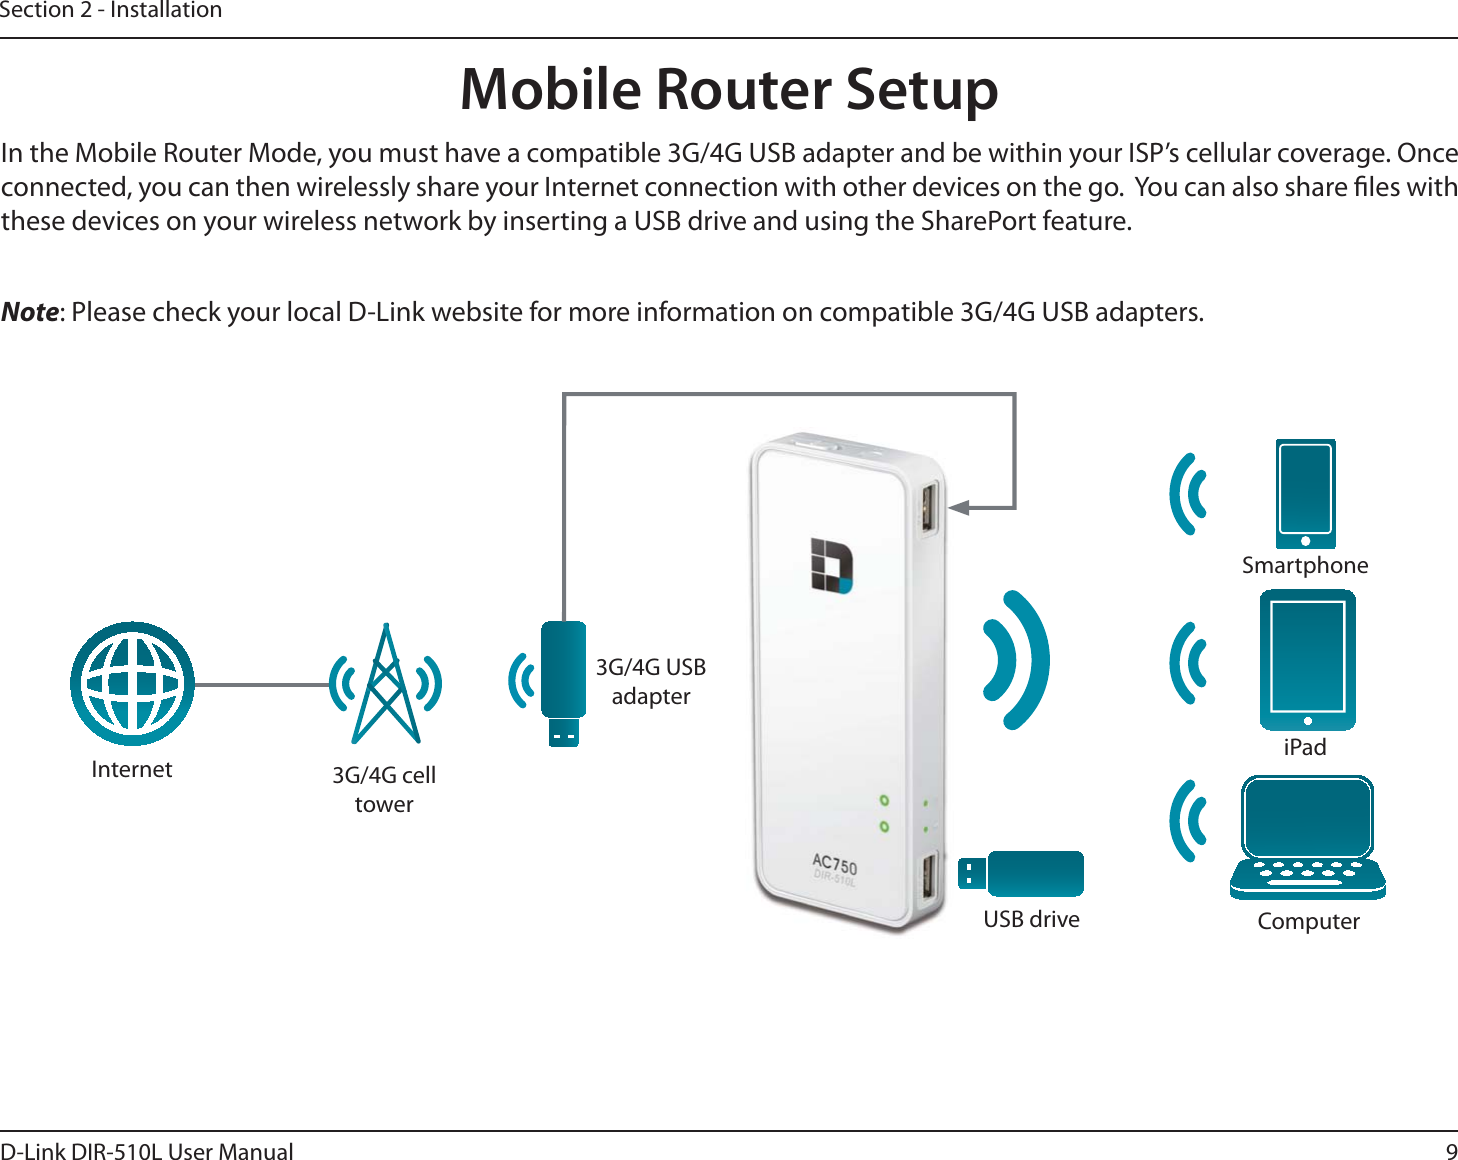 9D-Link DIR-510L User ManualSection 2 - InstallationMobile Router SetupIn the Mobile Router Mode, you must have a compatible 3G/4G USB adapter and be within your ISP’s cellular coverage. Once connected, you can then wirelessly share your Internet connection with other devices on the go.  You can also share les with these devices on your wireless network by inserting a USB drive and using the SharePort feature. Note: Please check your local D-Link website for more information on compatible 3G/4G USB adapters.ComputeriPadSmartphone3G/4G cell tower3G/4G USBadapterInternetUSB drive